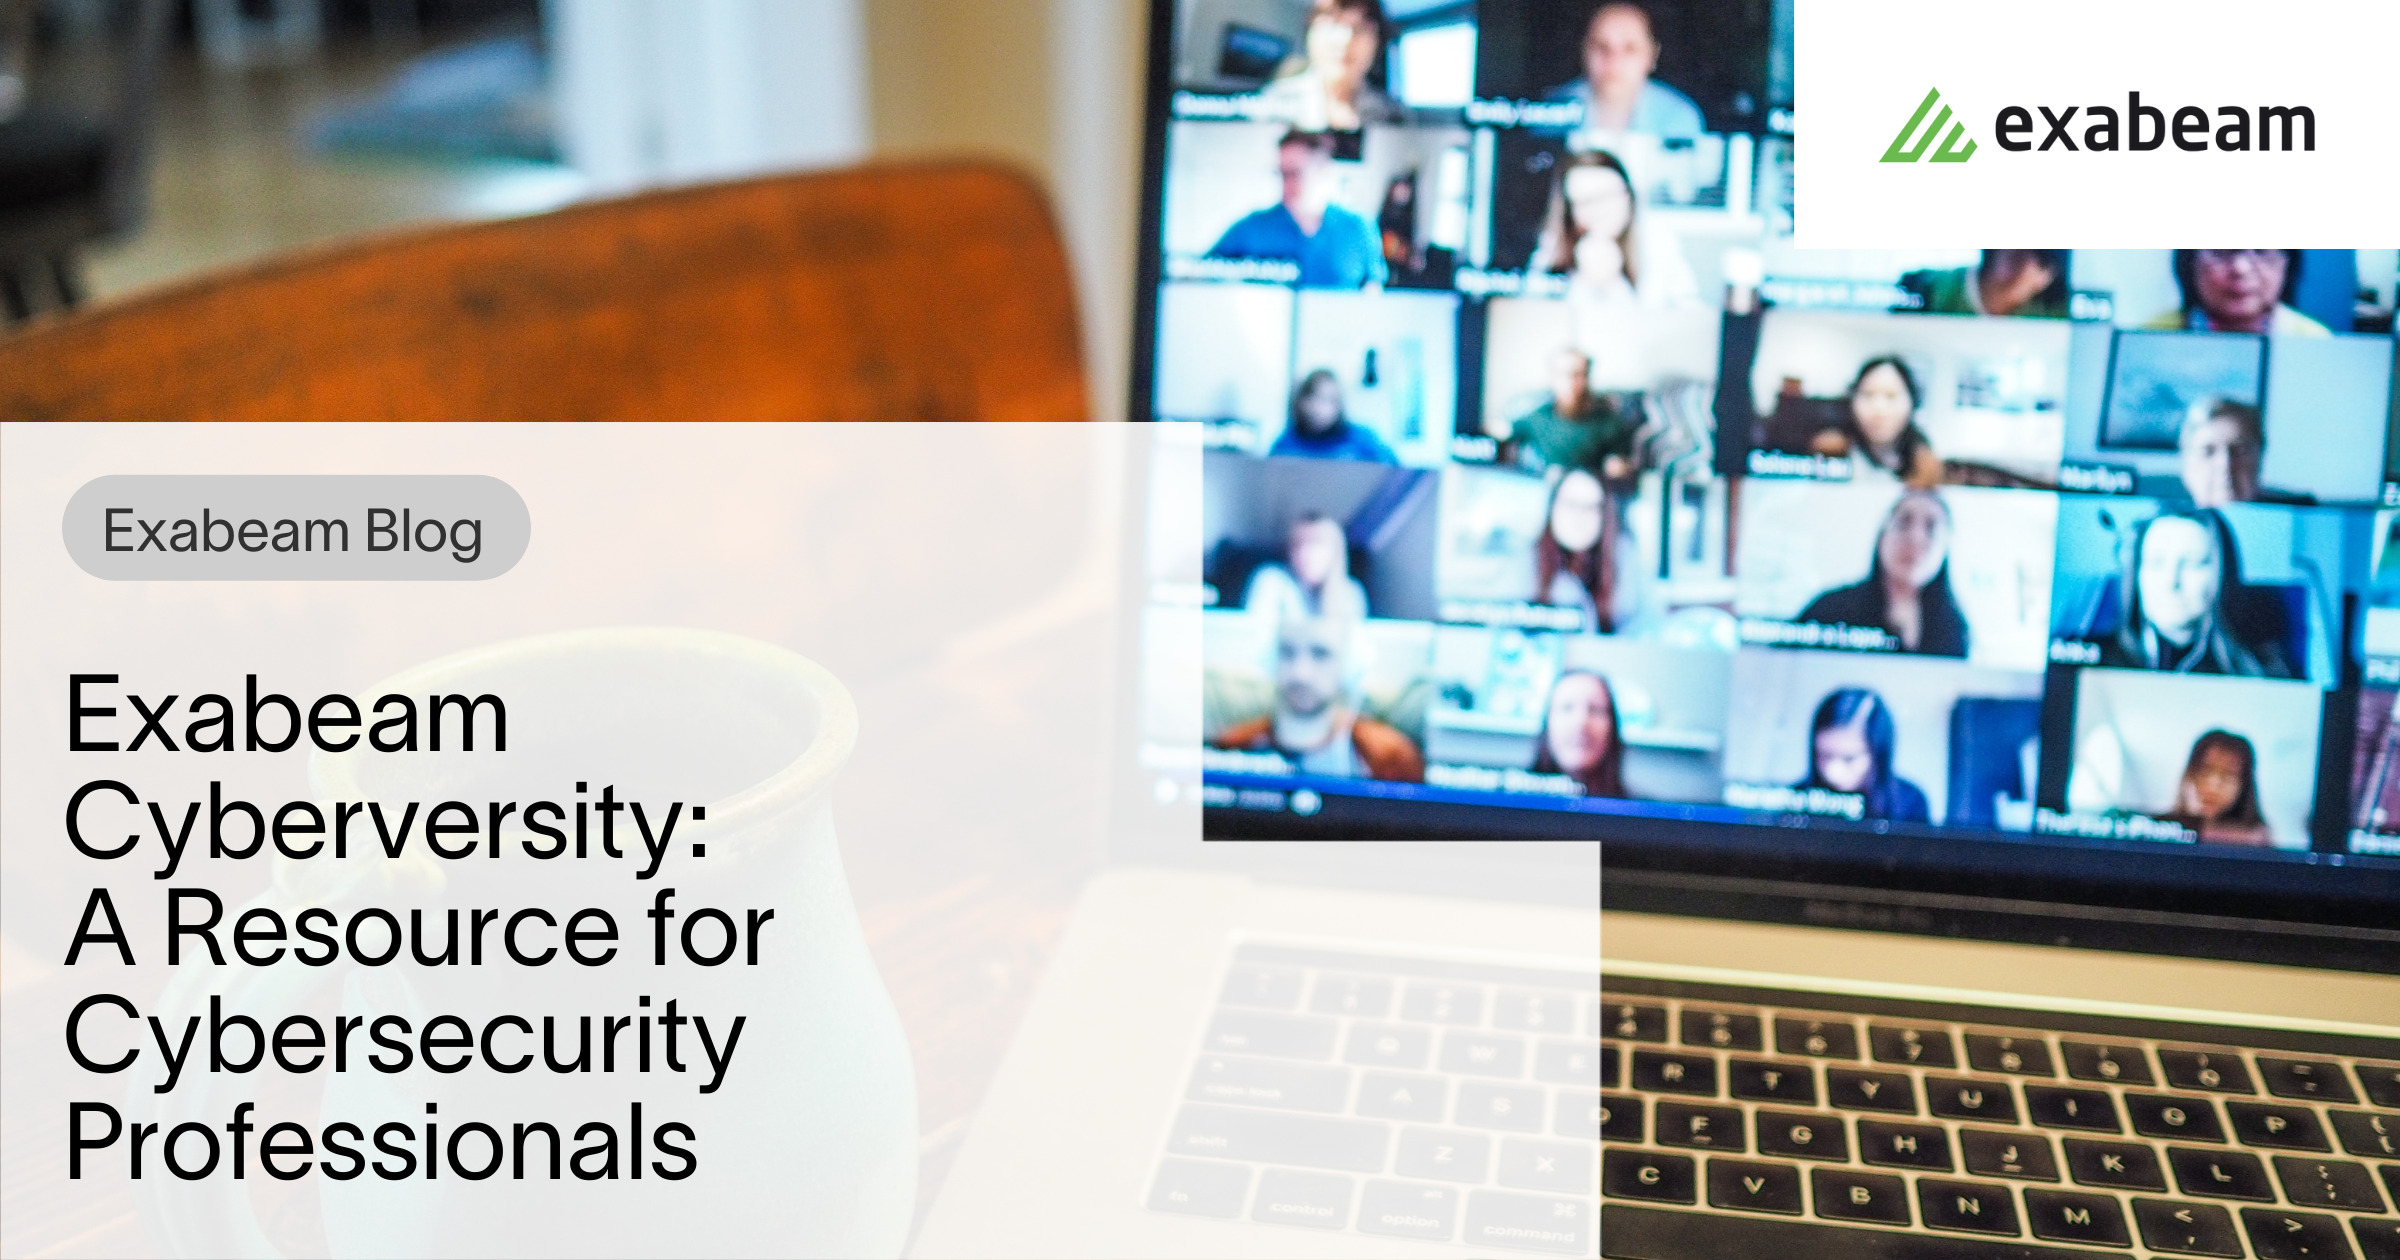 Exabeam Cyberversity: A Resource for Cybersecurity Professionals